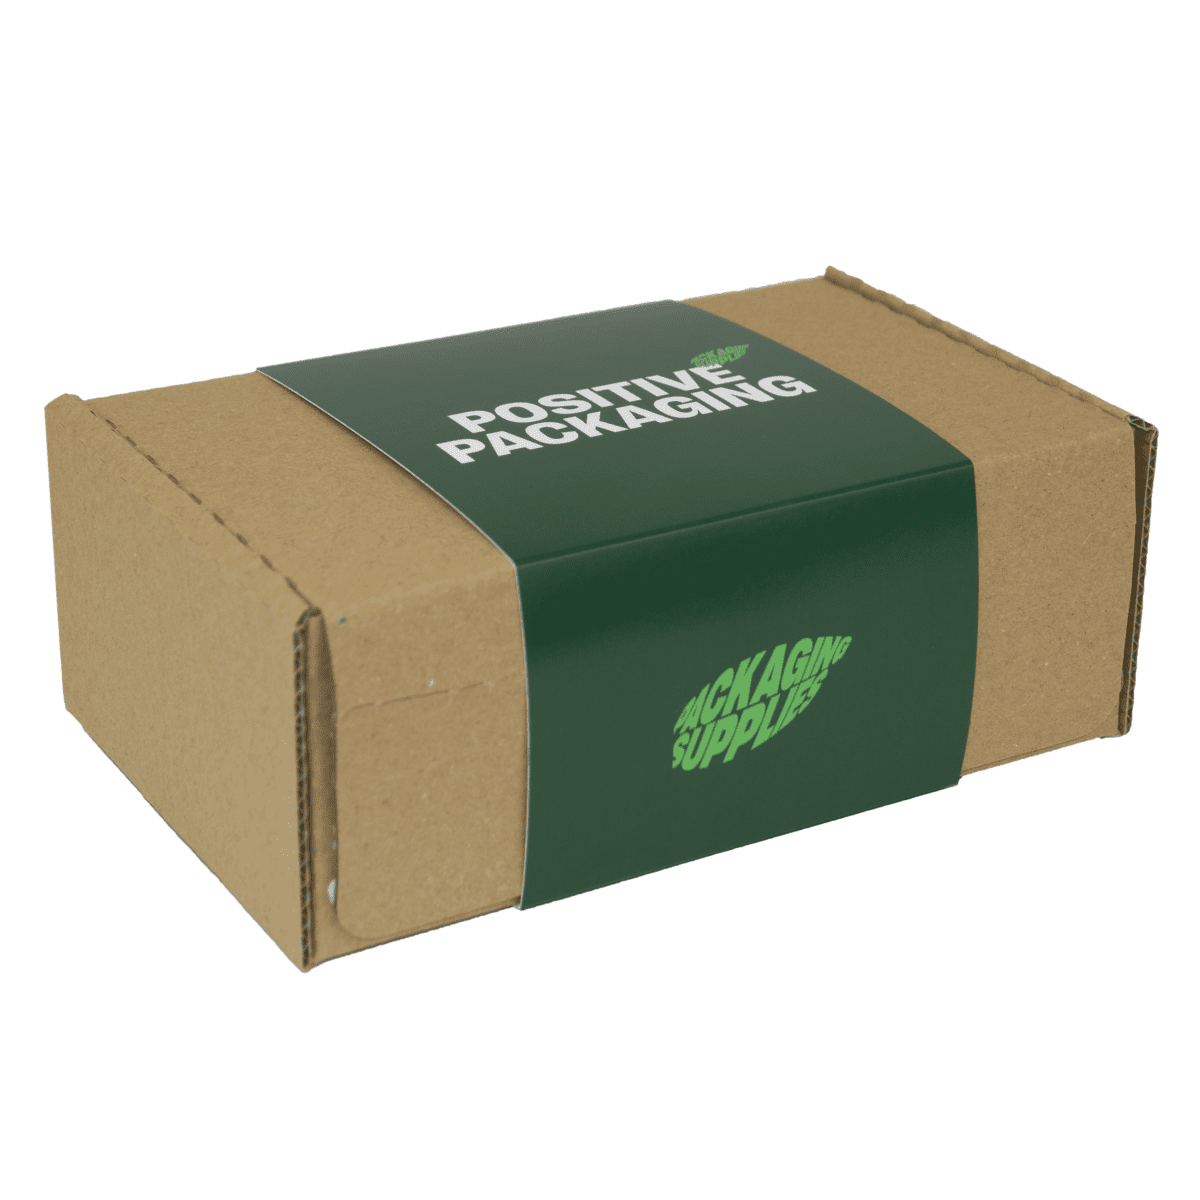 Buy Branded Ecommerce Boxes Packaging Supplies